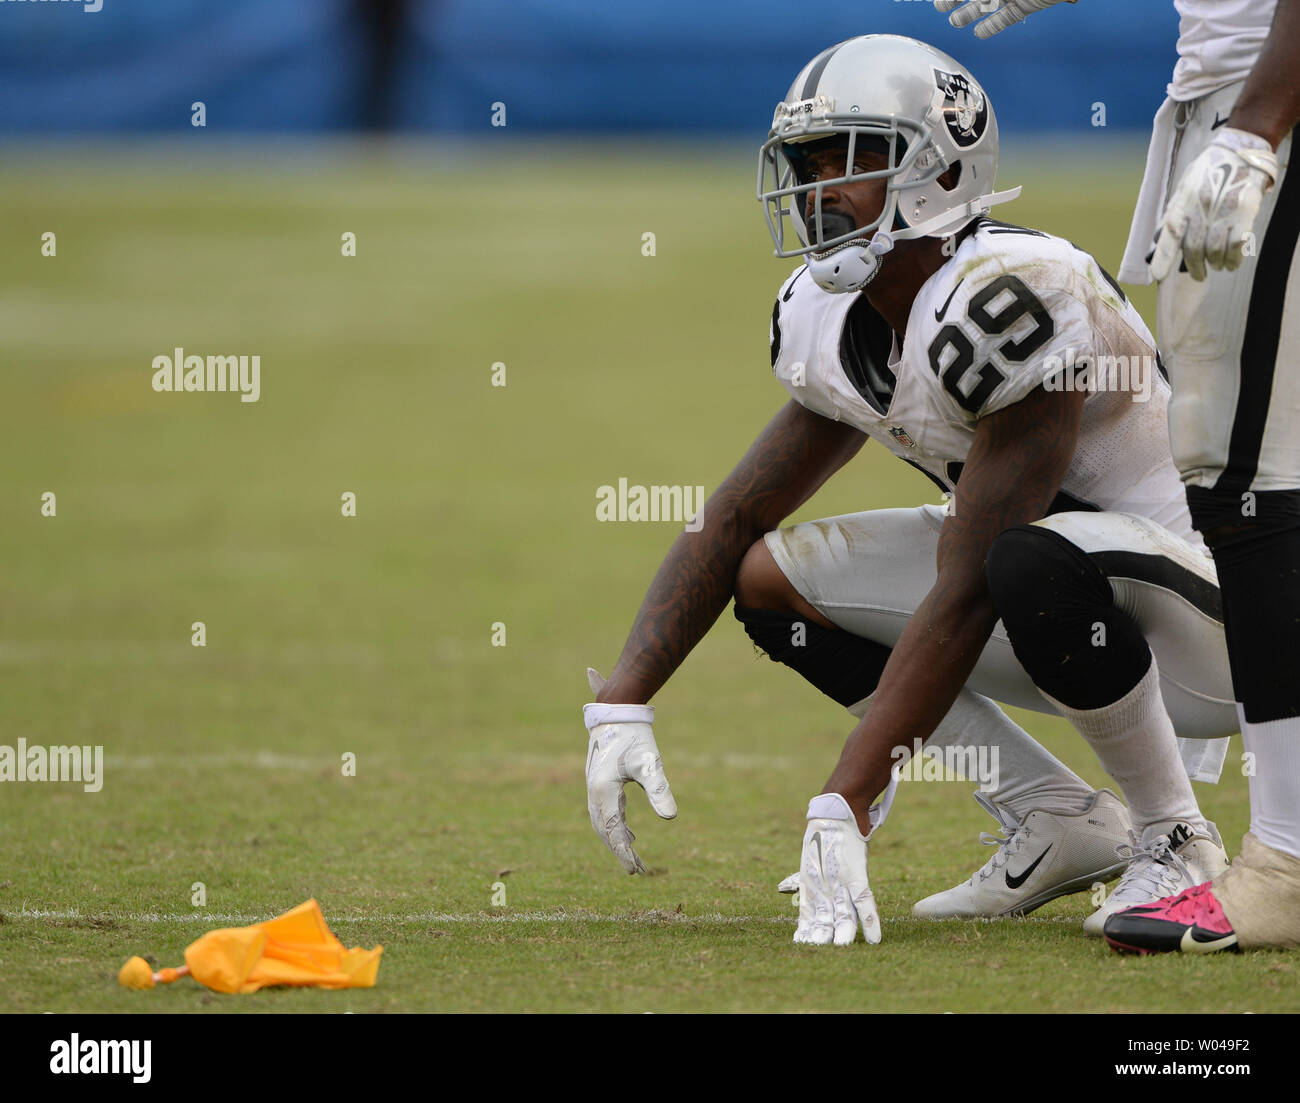 Oakland Raiders  cornerback David Amerson grimaces after getting called for pass interference in the fourth quarter at Qualcomm Stadium in San Diego on October 25, 2015. Photo by Jon SooHoo/UPI Stock Photo